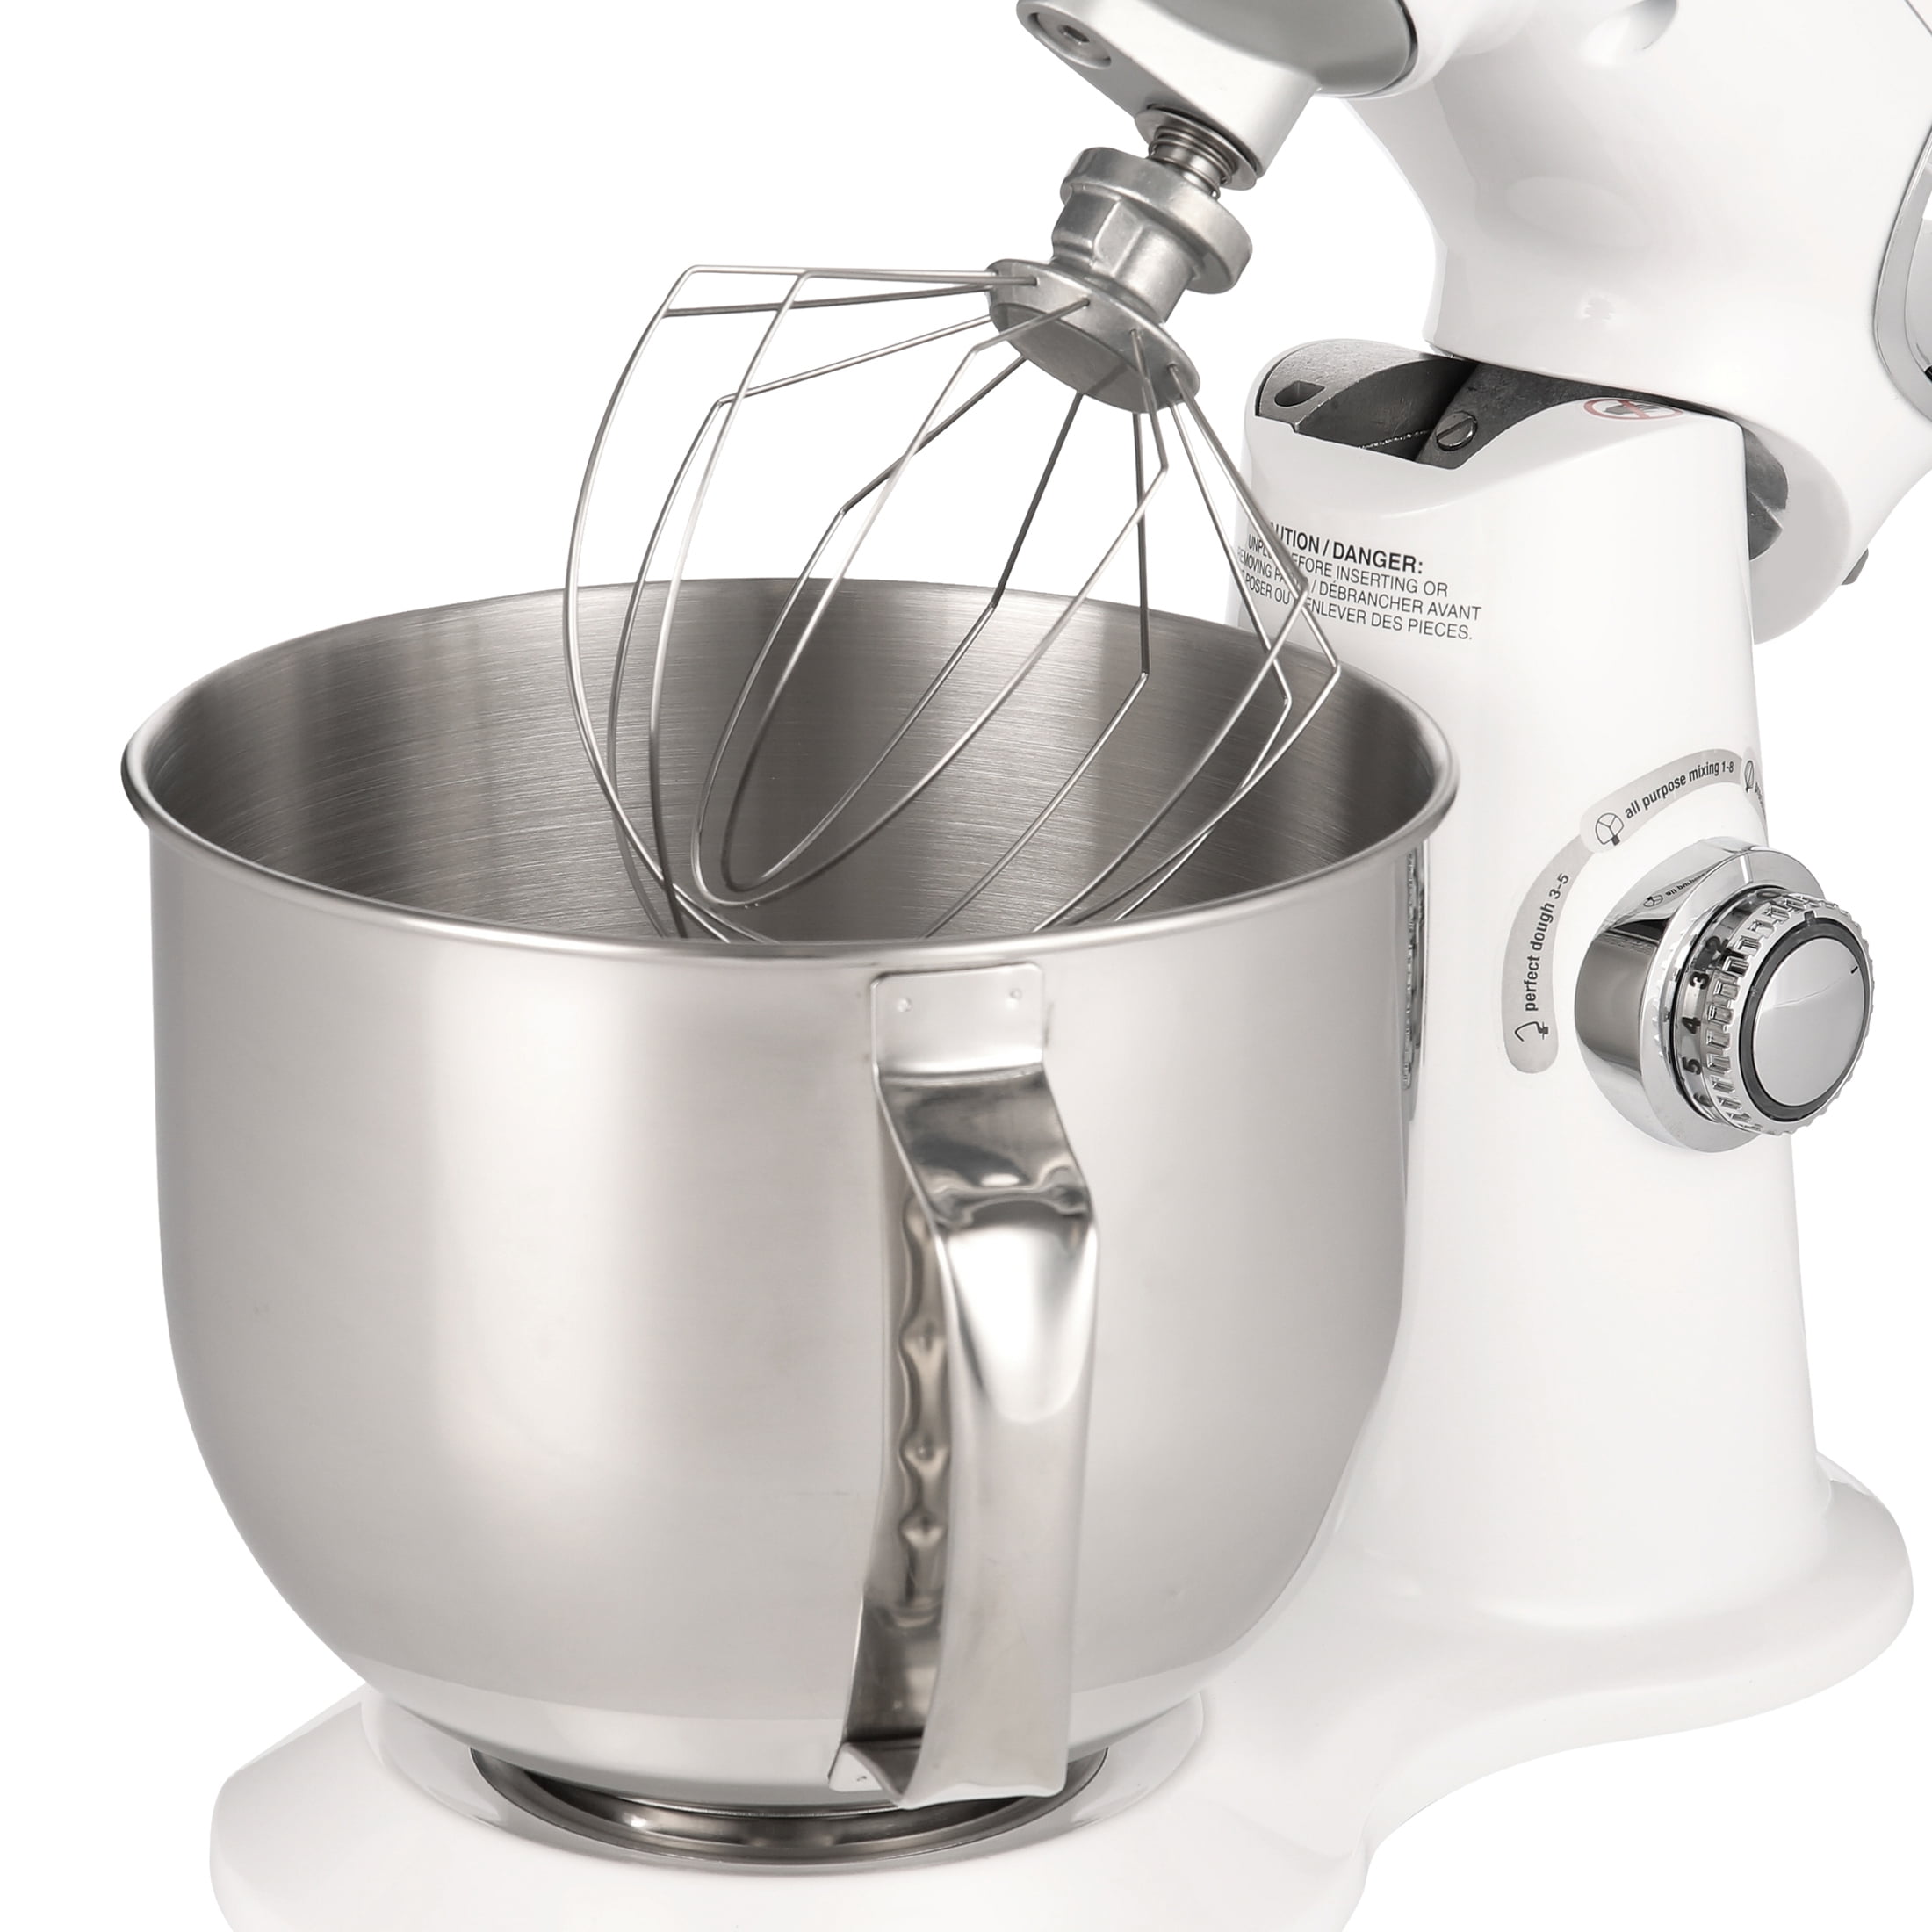 Cuisinart 5.5-quart Stand Mixer, Silver Lining - Spoons N Spice